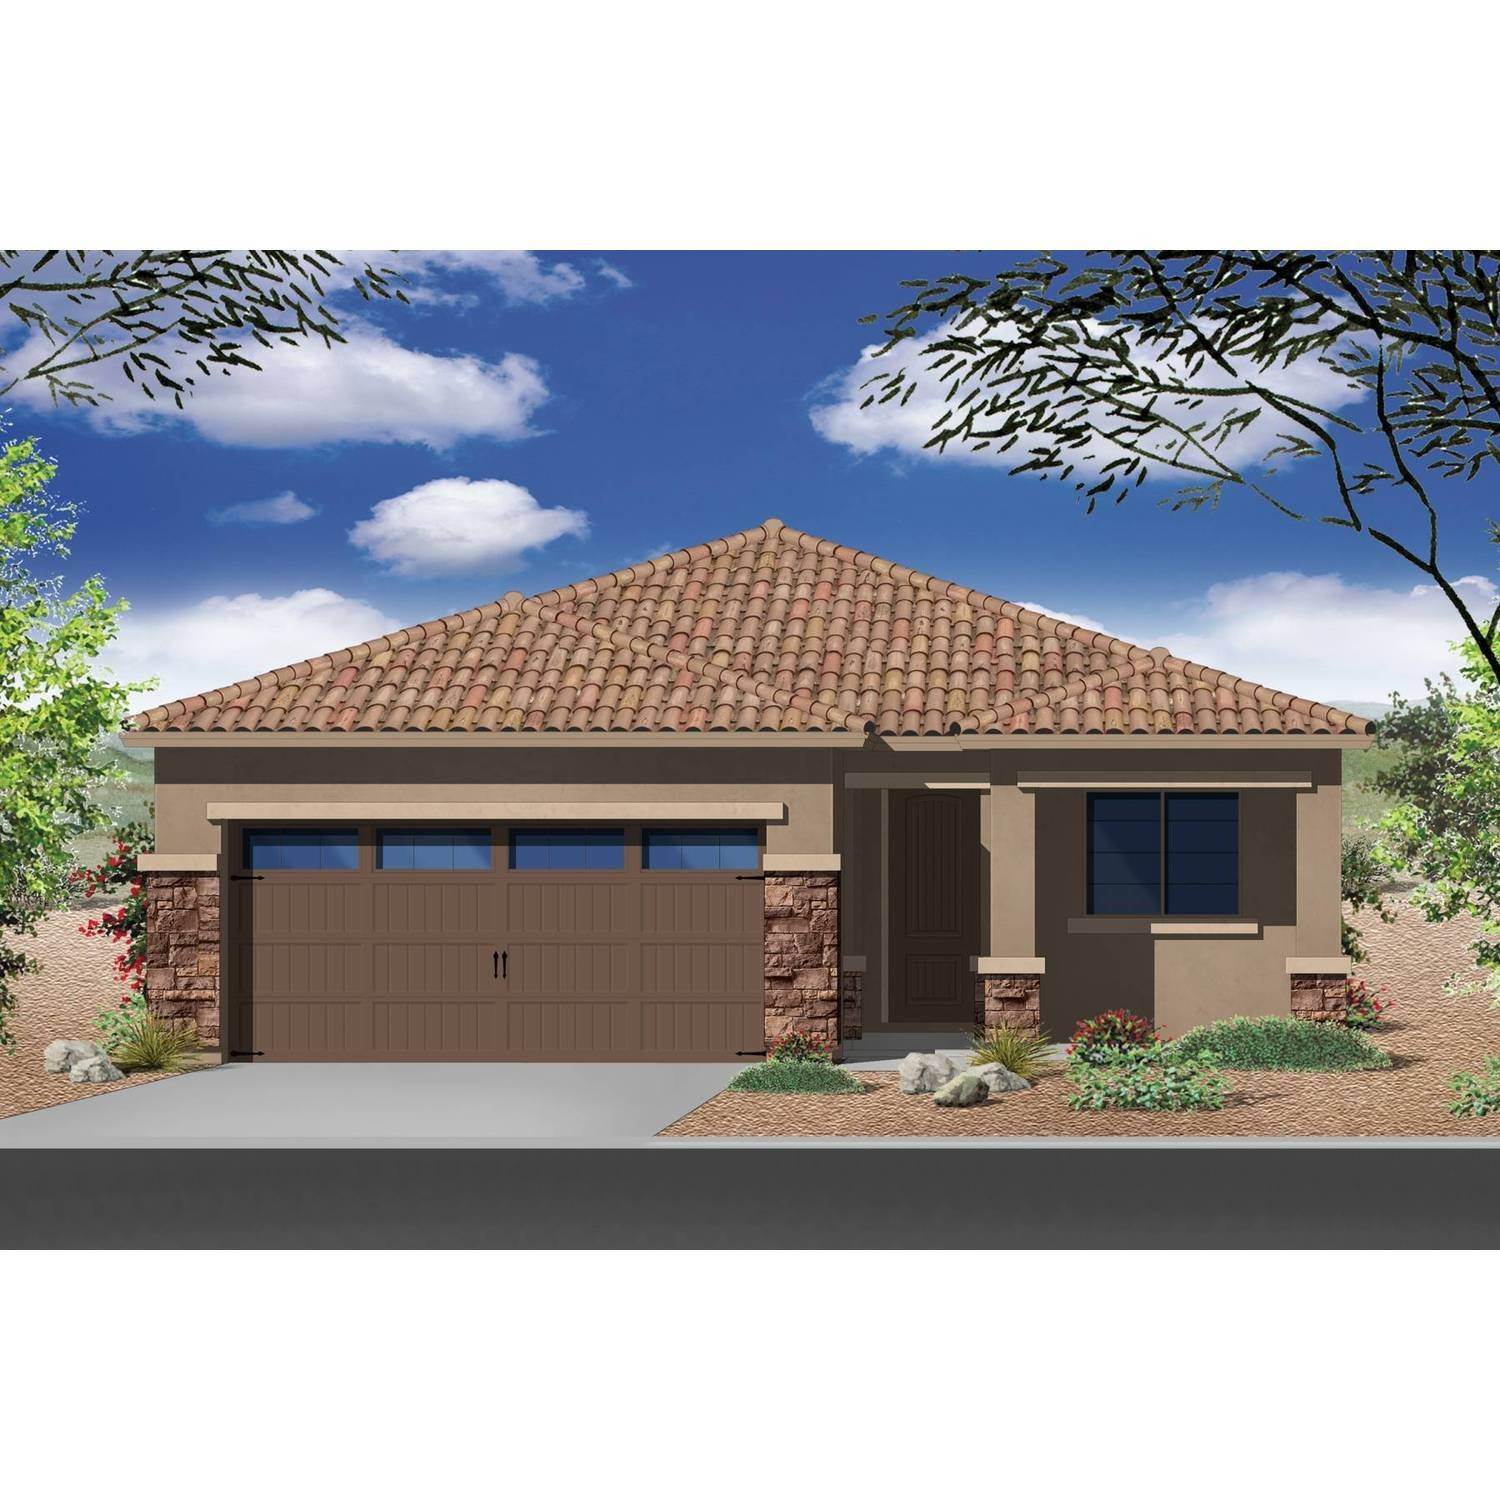 Single Family for Sale at Waddell, AZ 85355